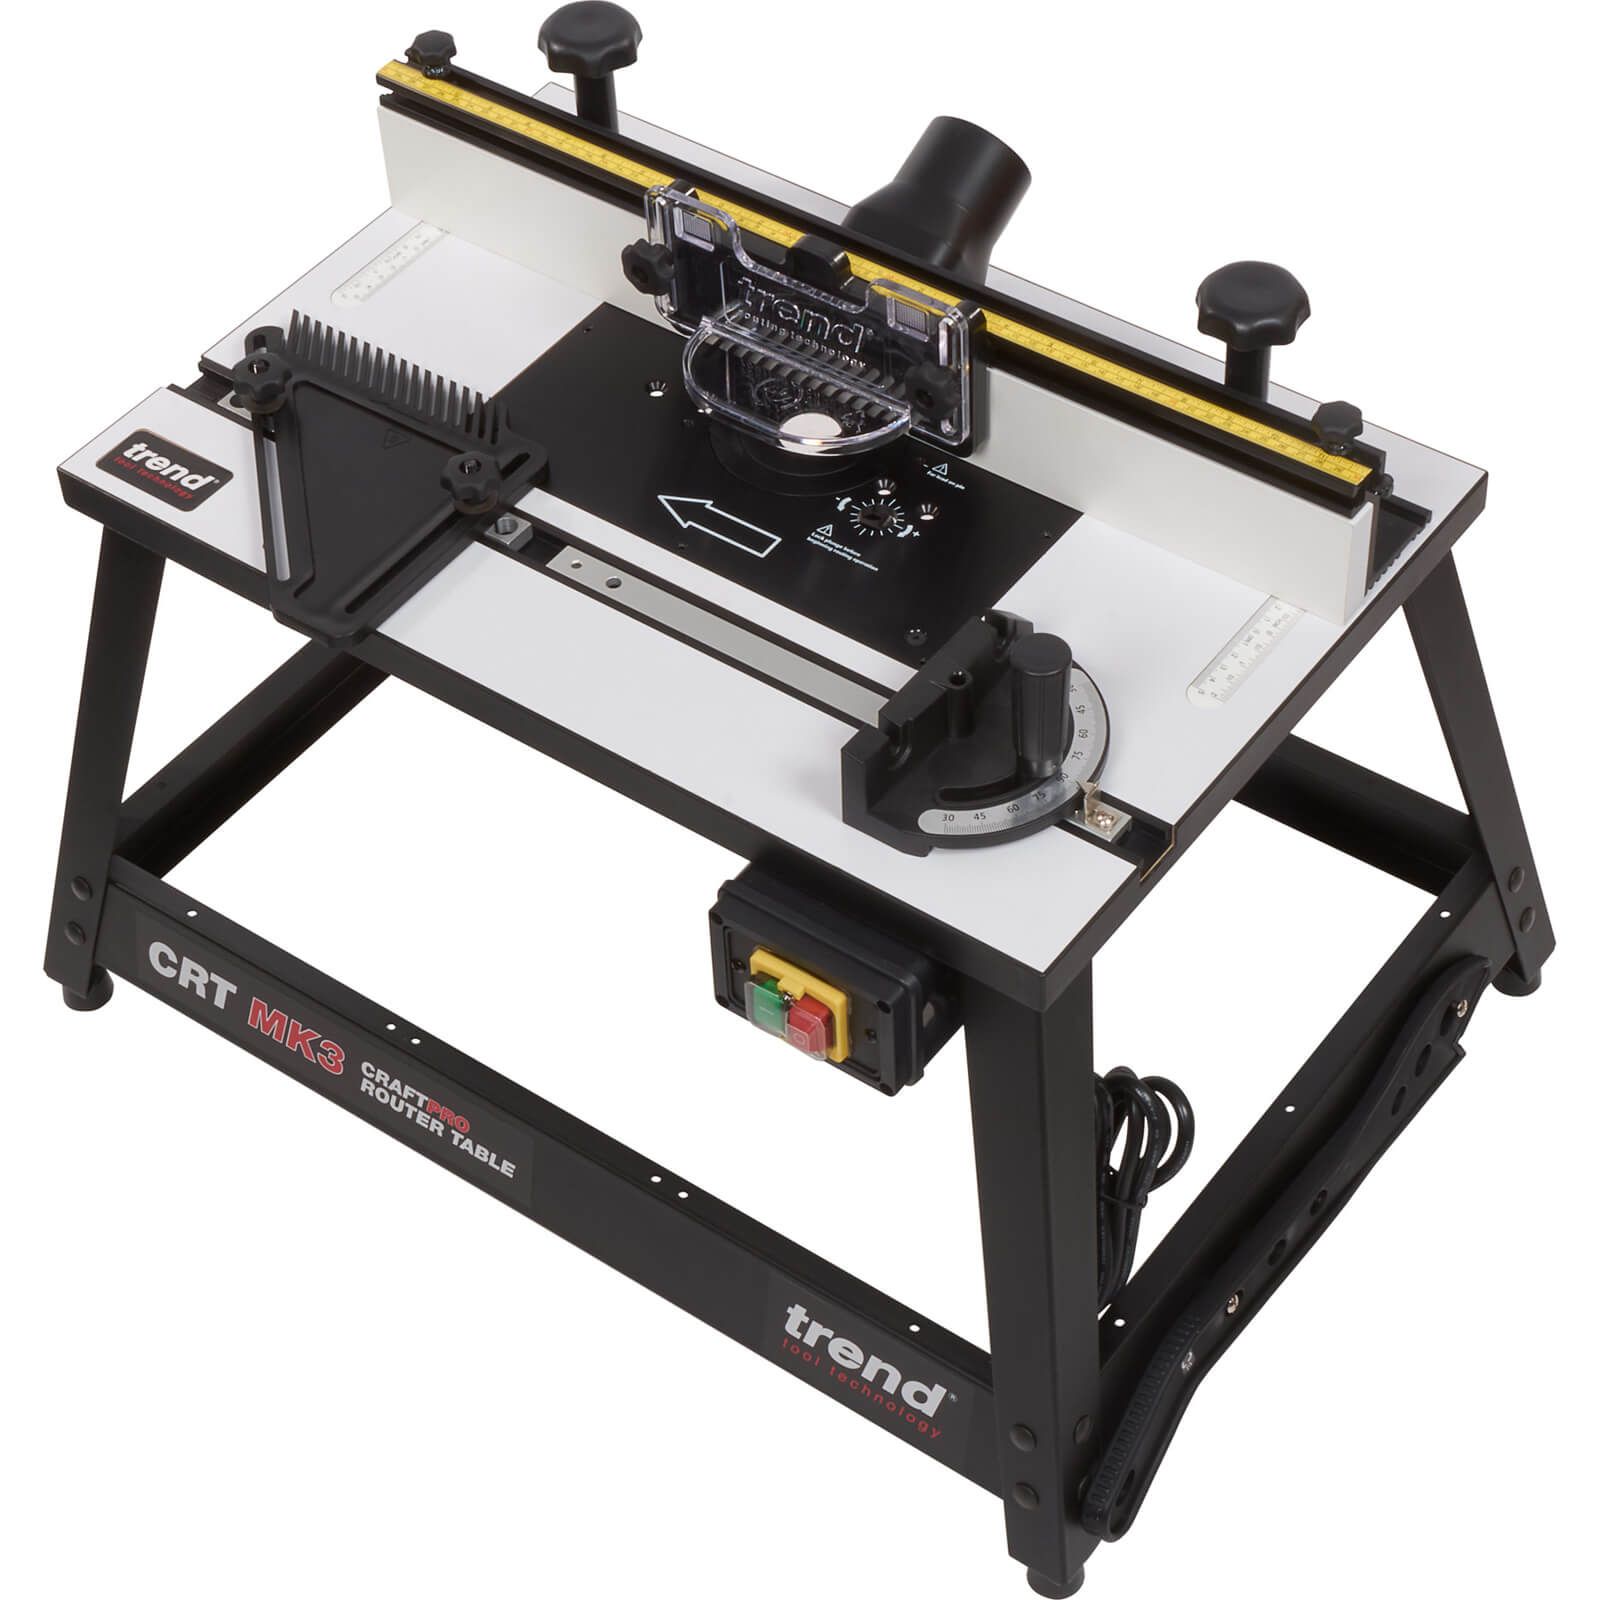 Trend CRAFTPRO Mk3 Router Table 240v